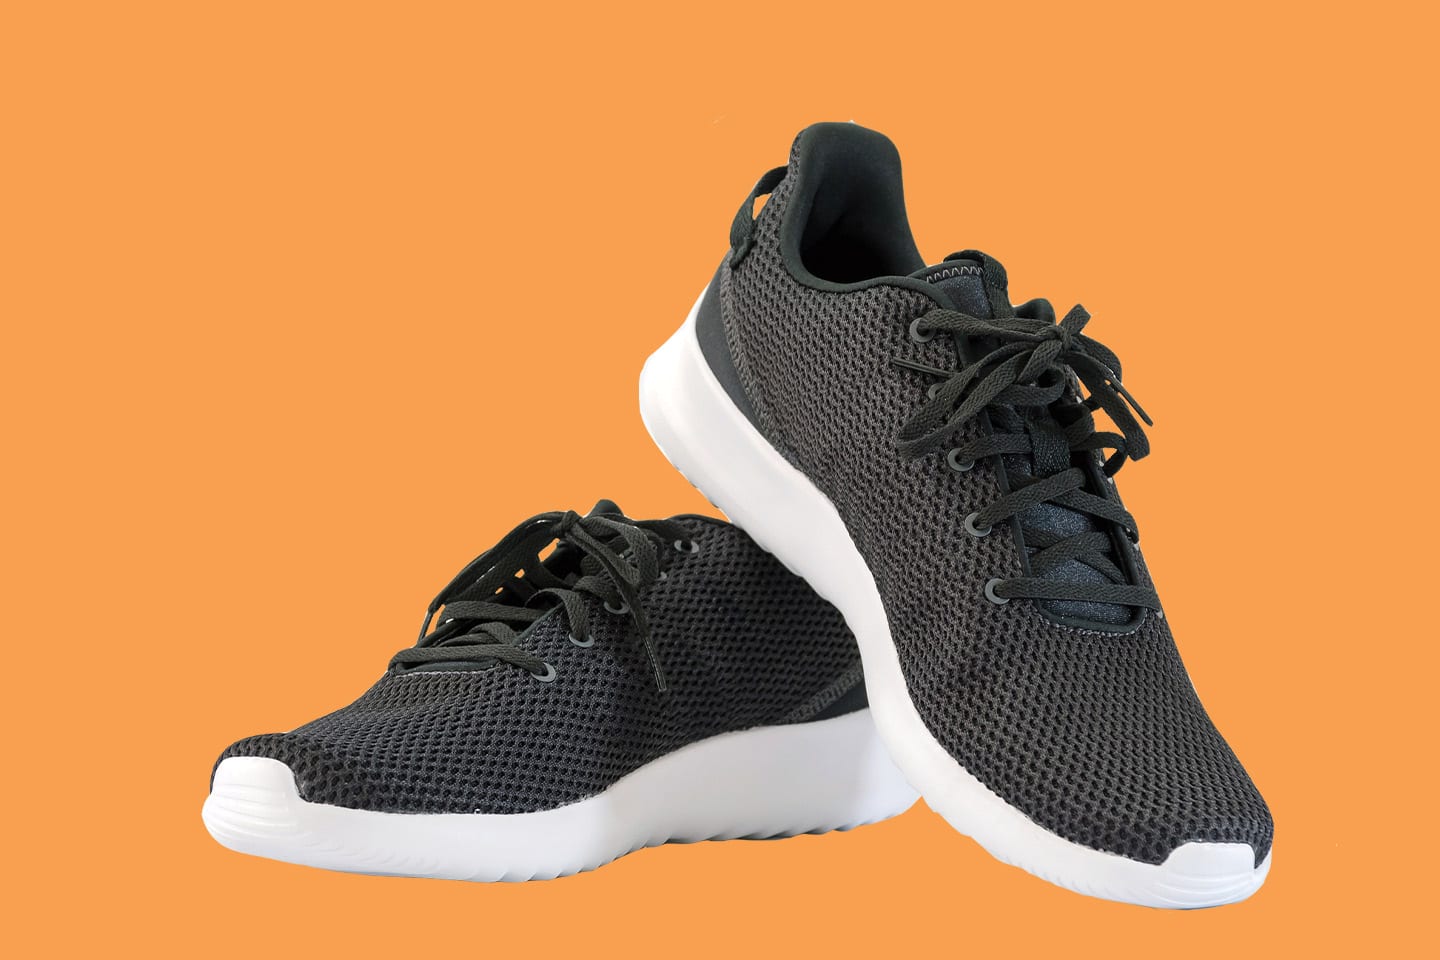 black and white running shoes on orange background chattanooga